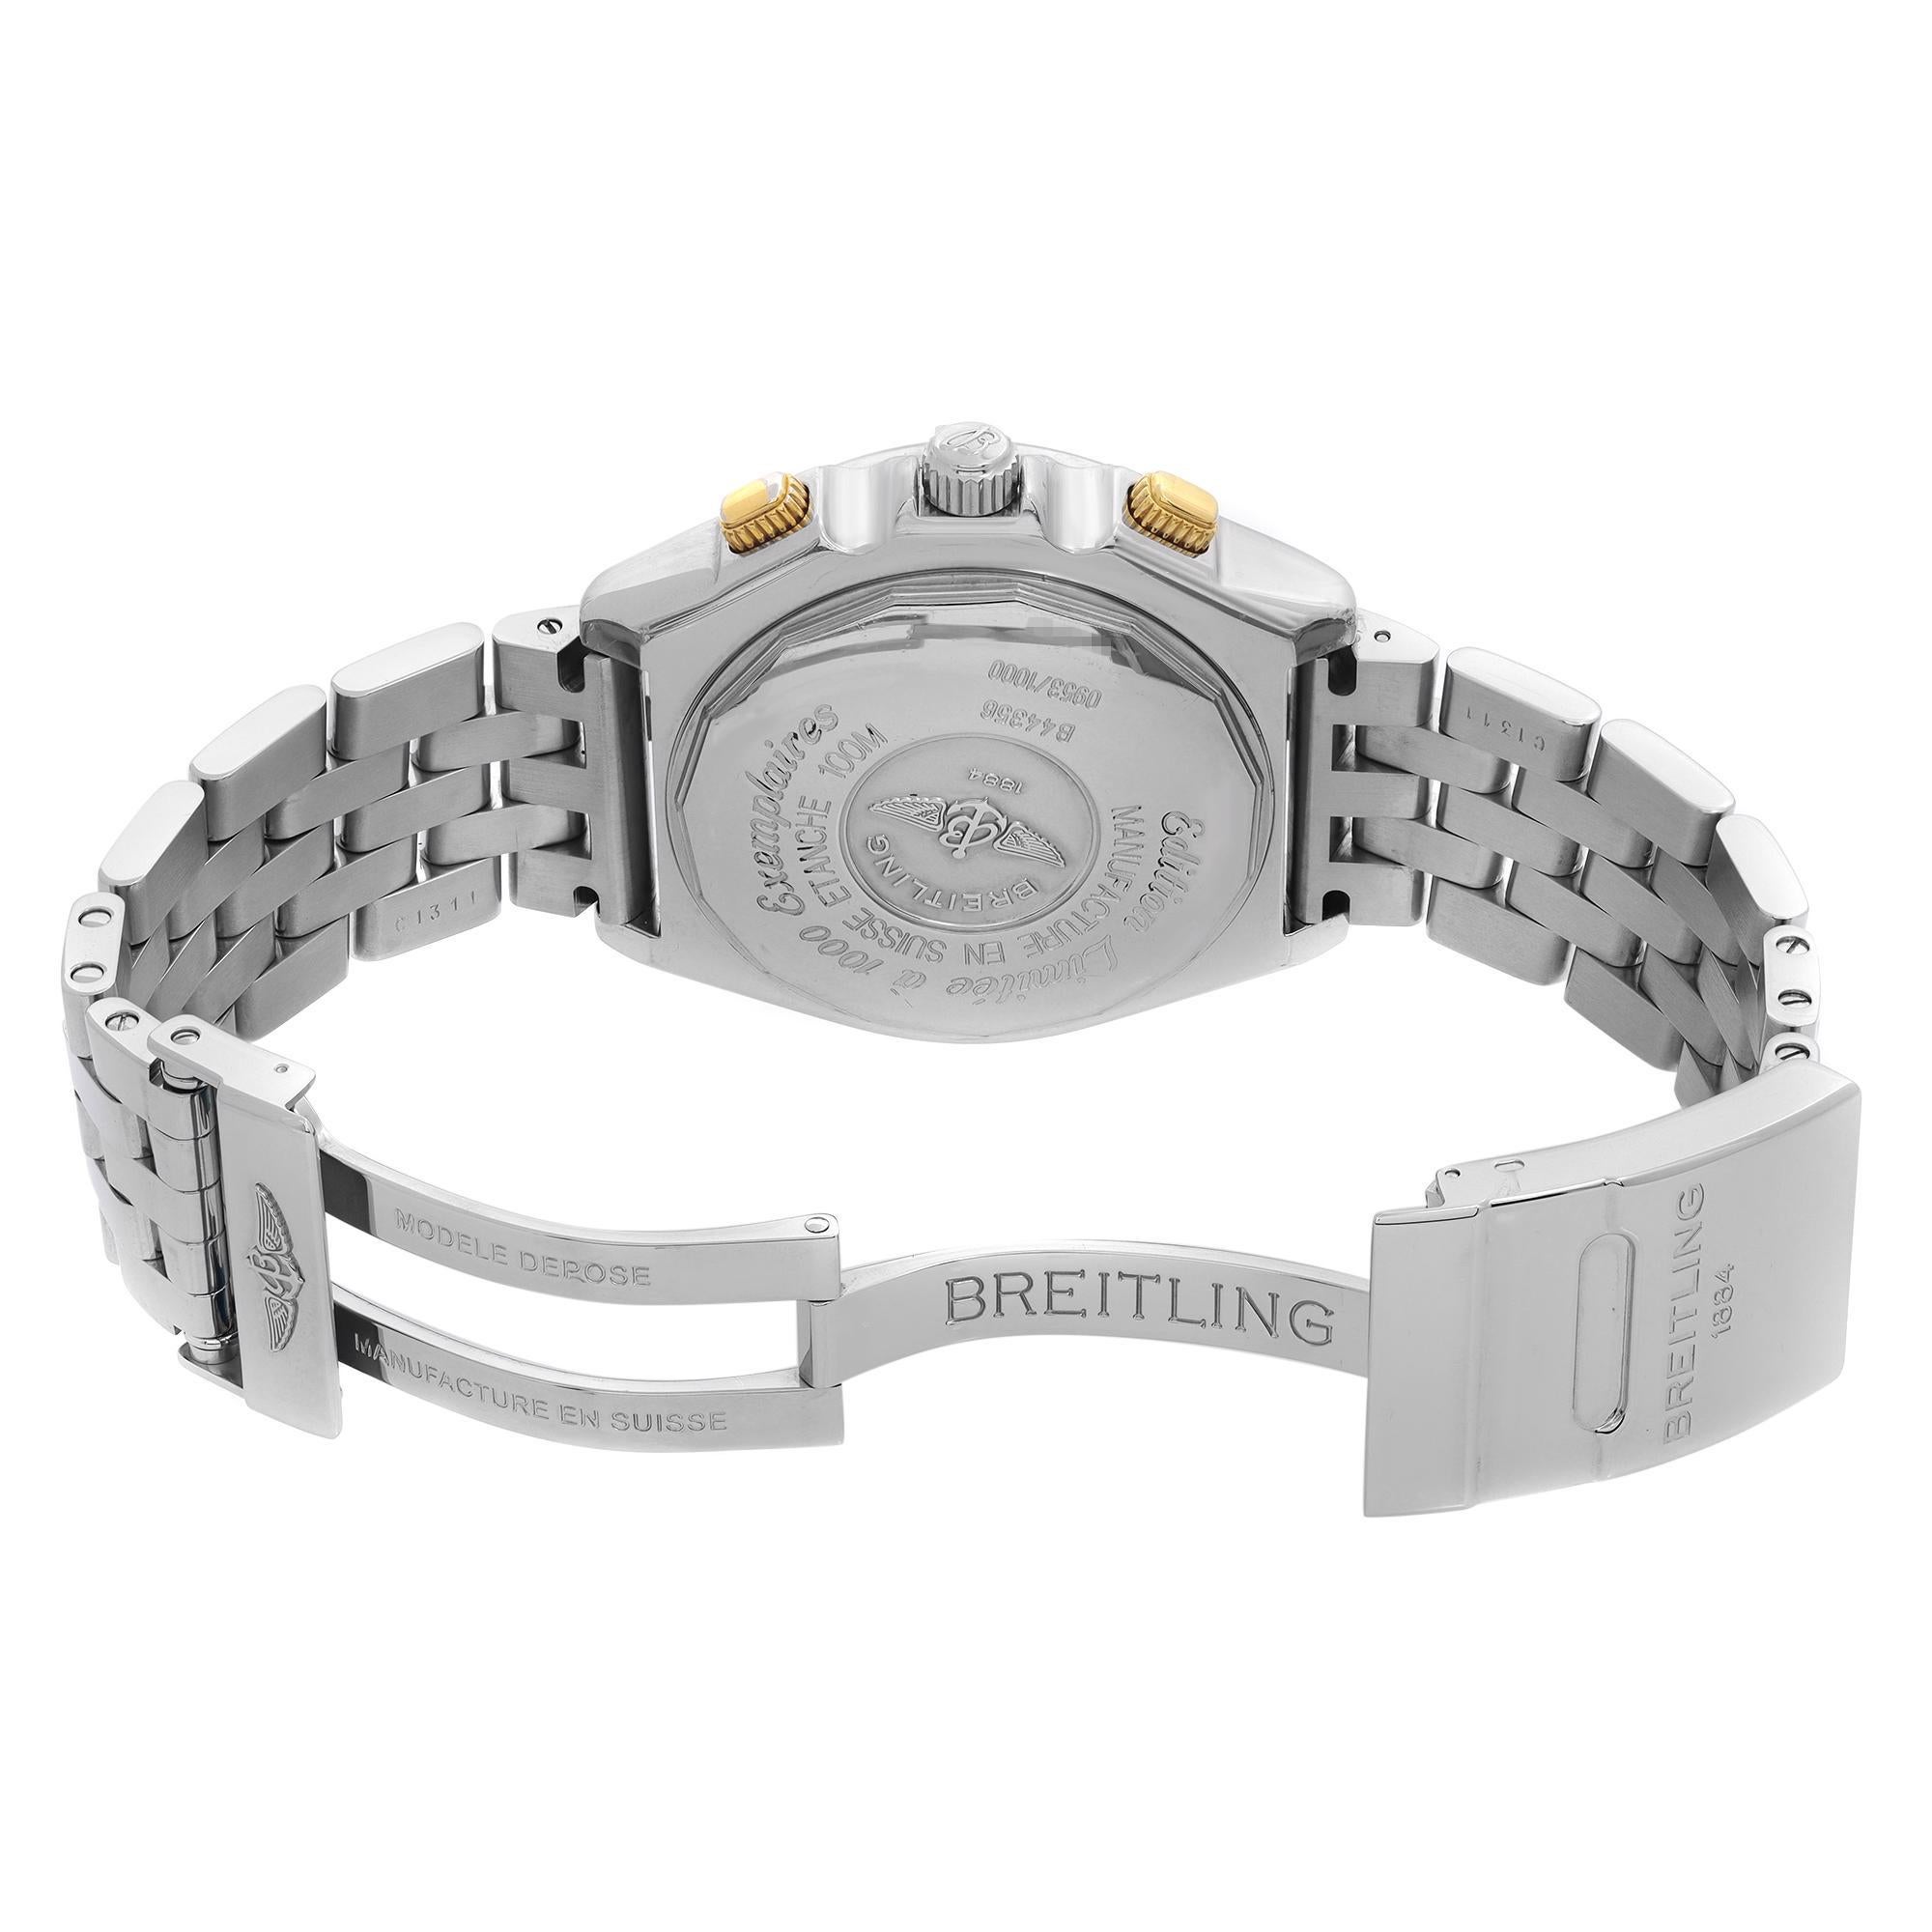 Breitling Crosswind Limited Steel White Dial Automatic Watch B44356 In Excellent Condition For Sale In New York, NY